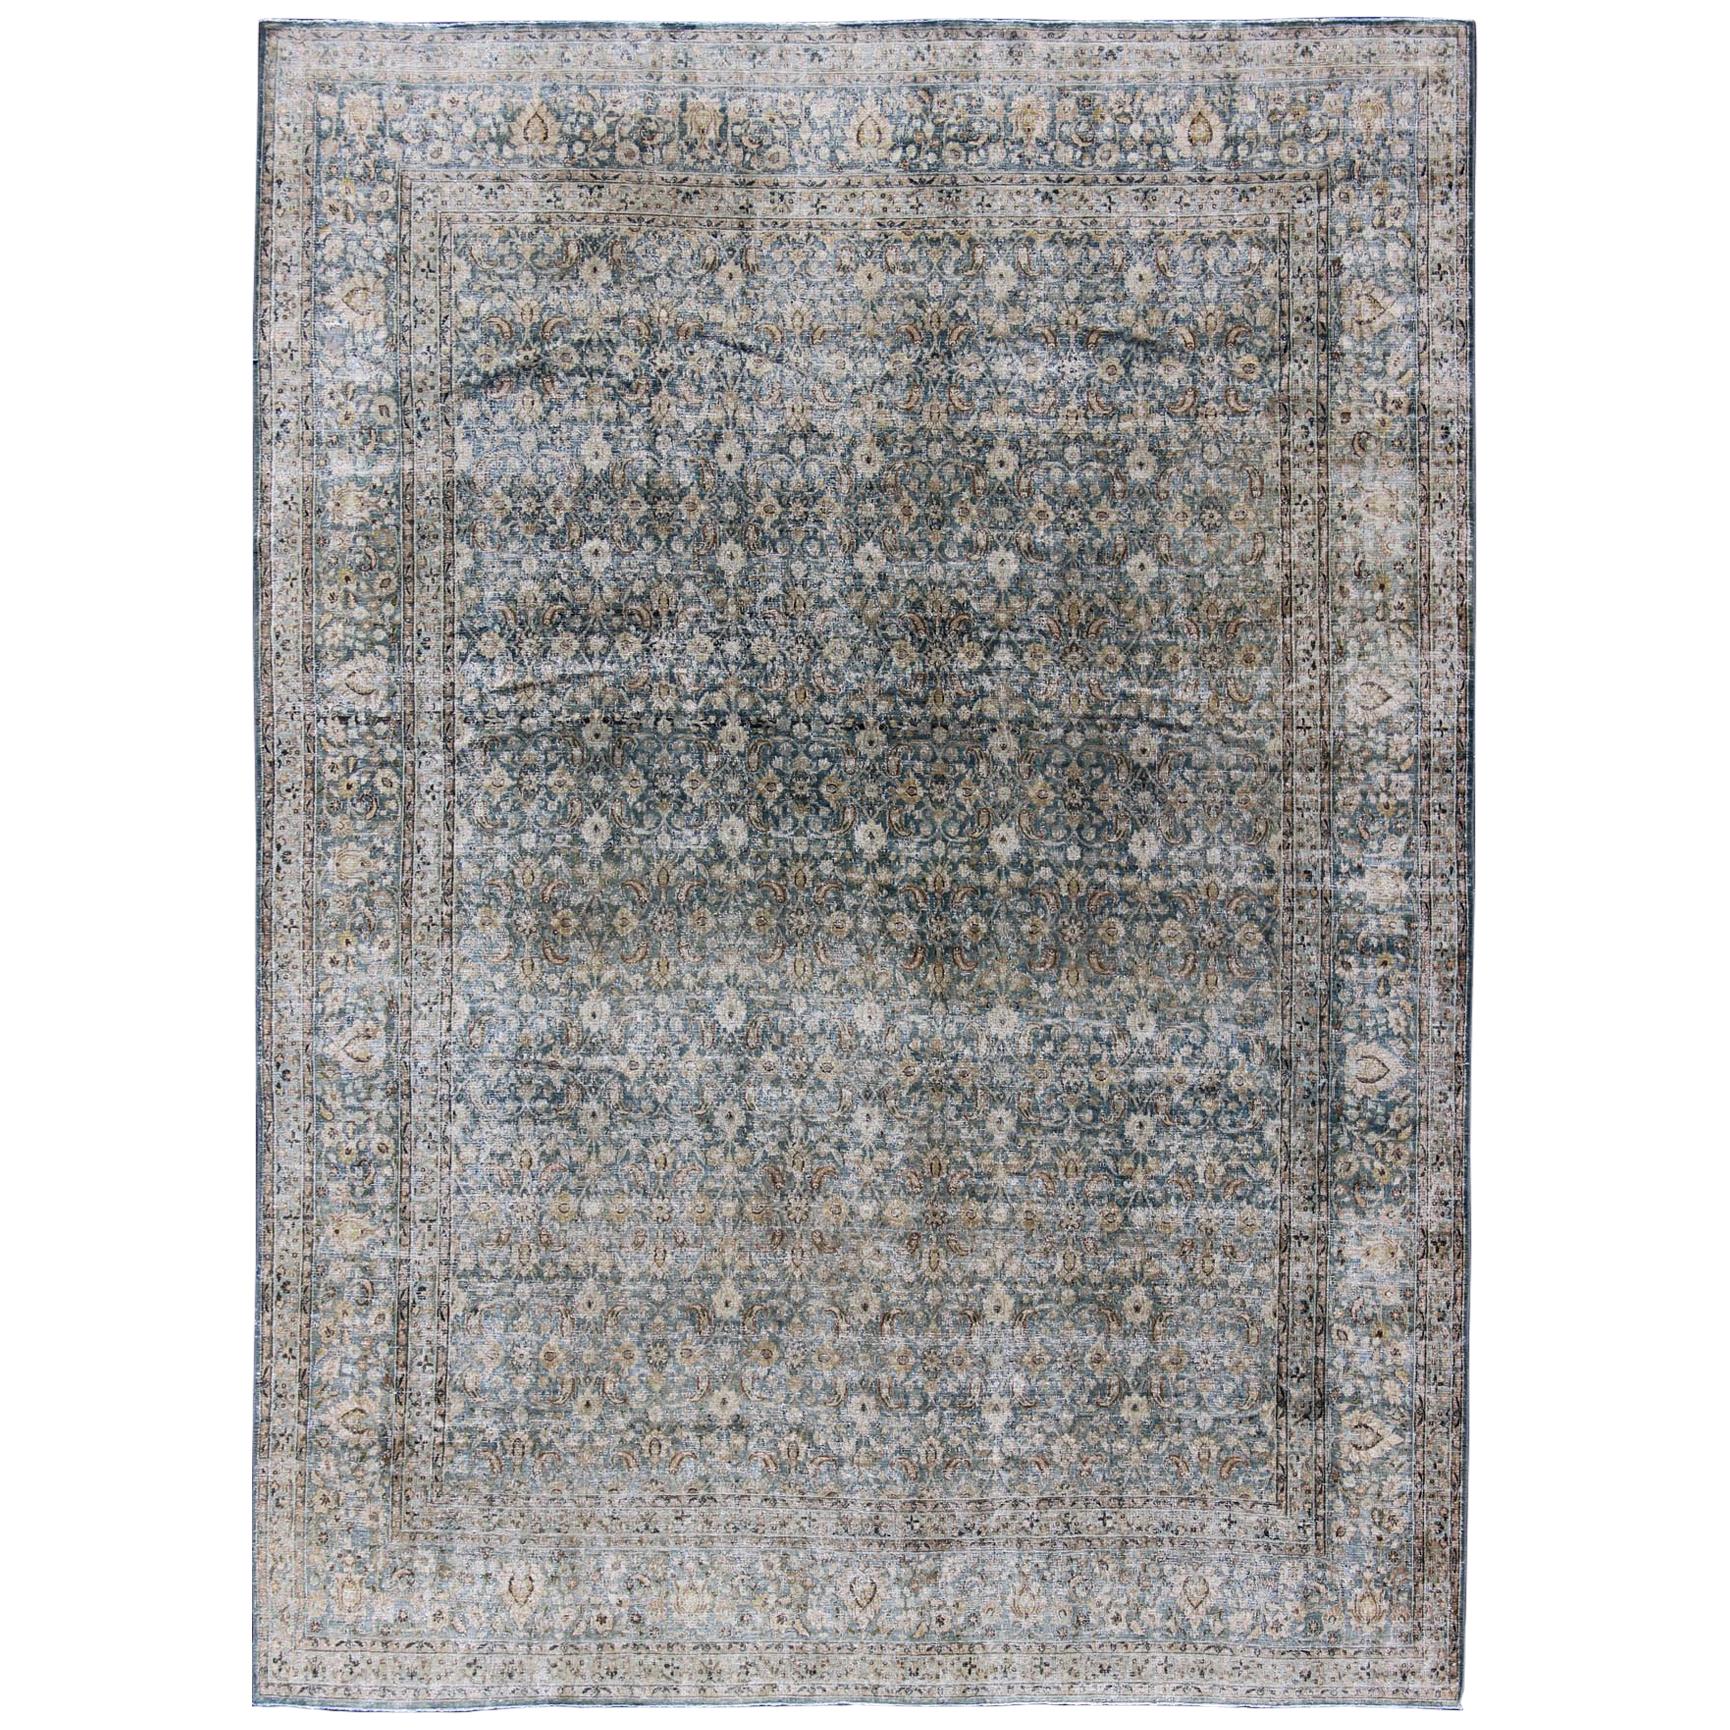 Antique Persian Khorasan Rug with Herati design in Blue, Light Gray & Brown For Sale